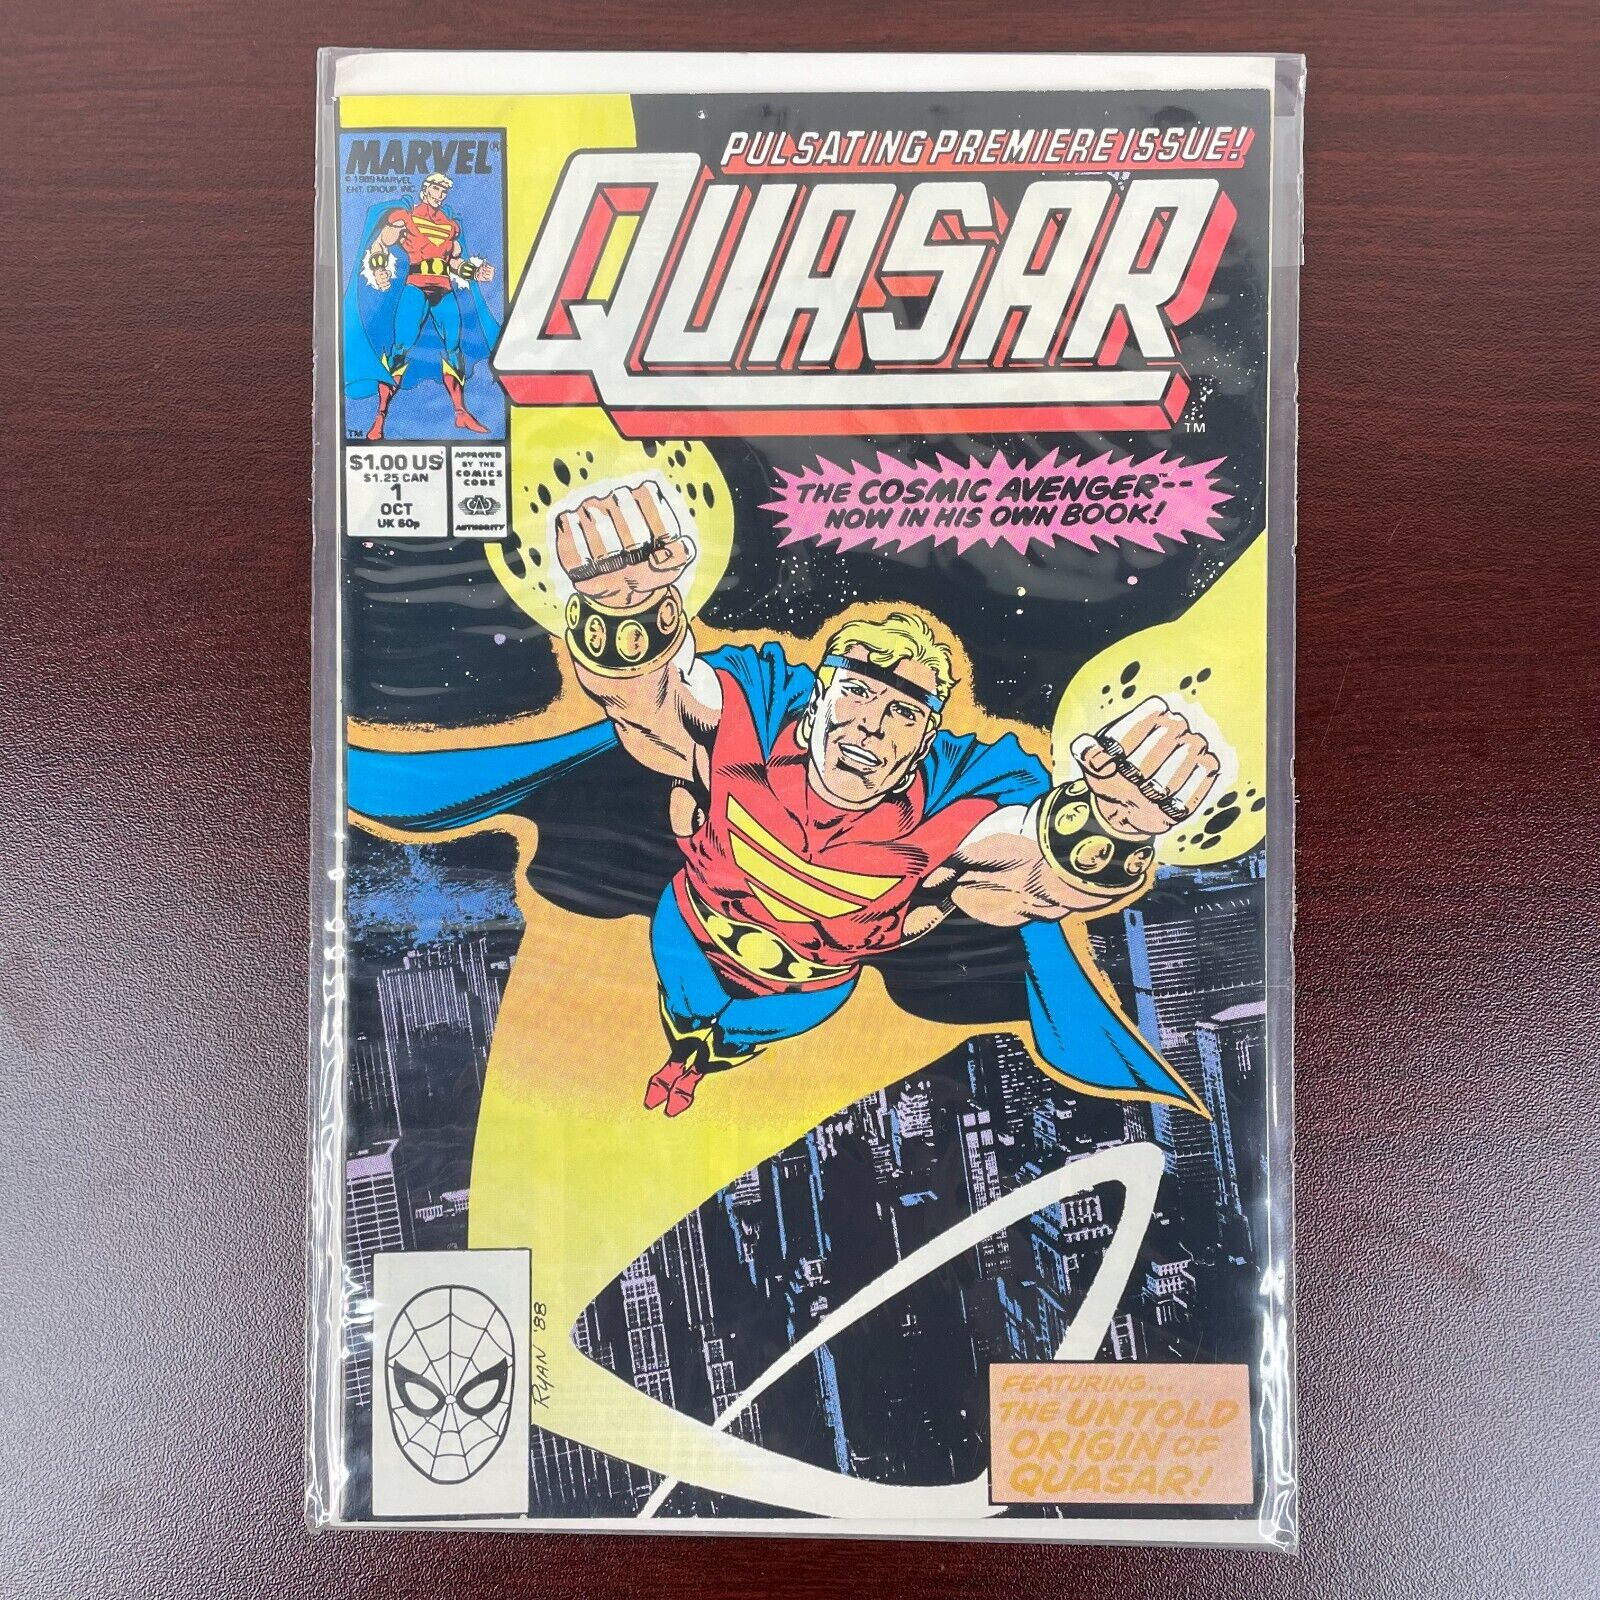 Quasar (1989, Marvel) - VF+/NM - Pick Your Issue